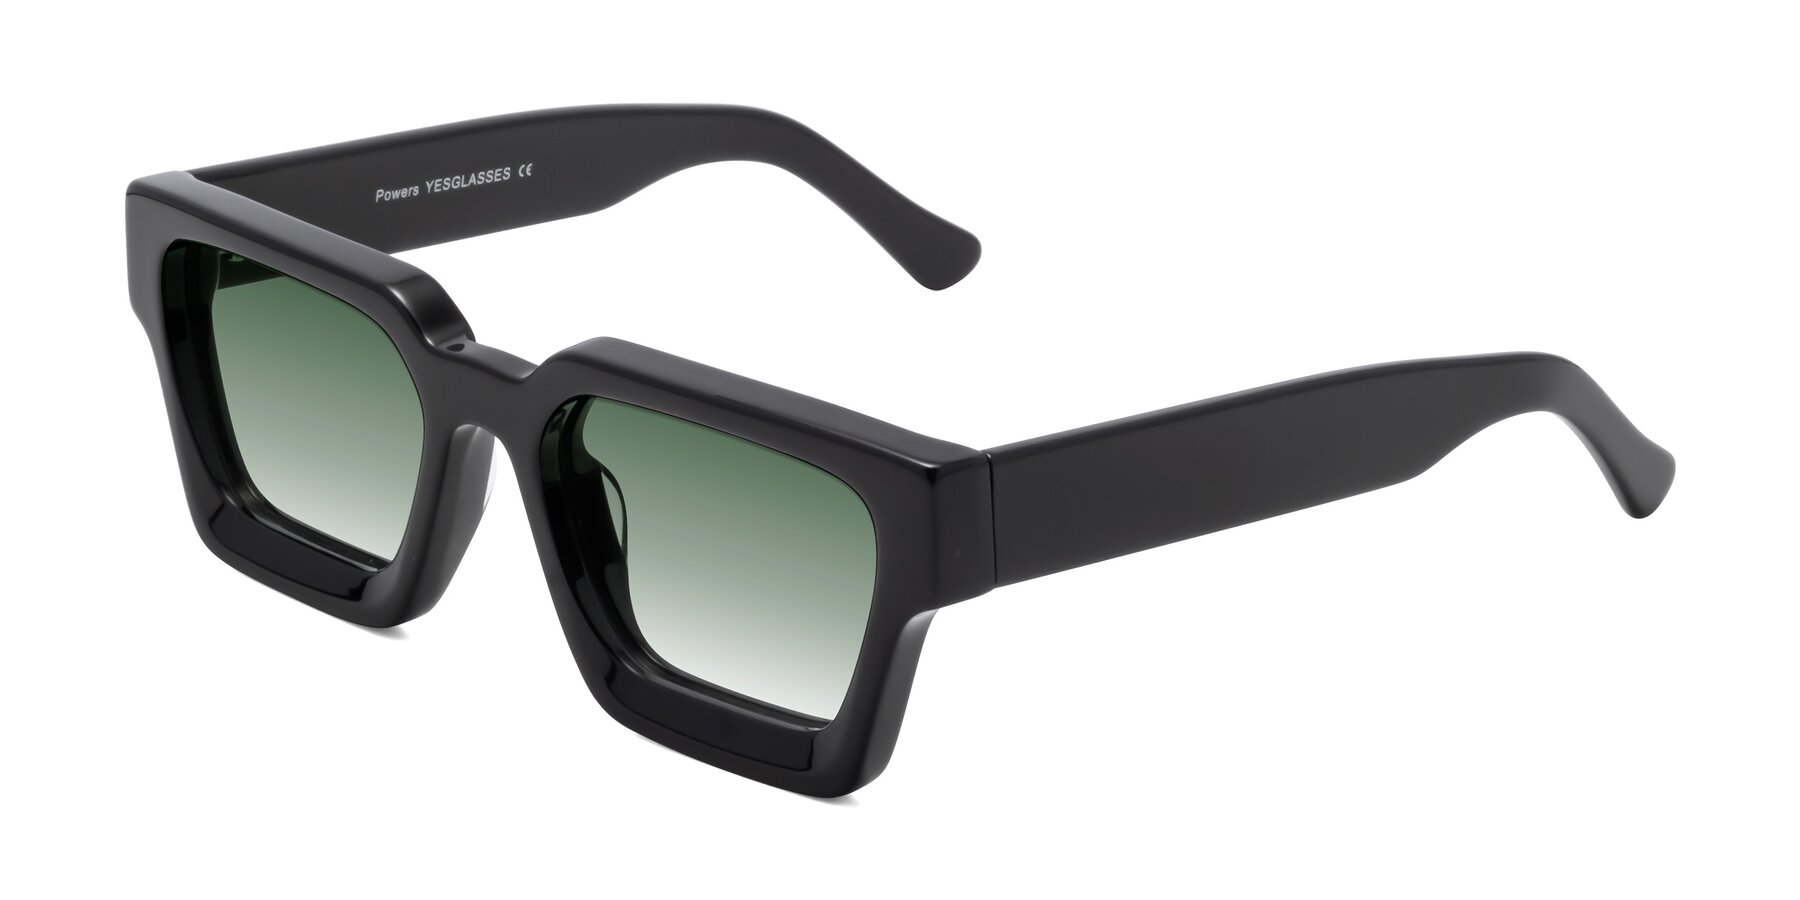 Angle of Powers in Black with Green Gradient Lenses